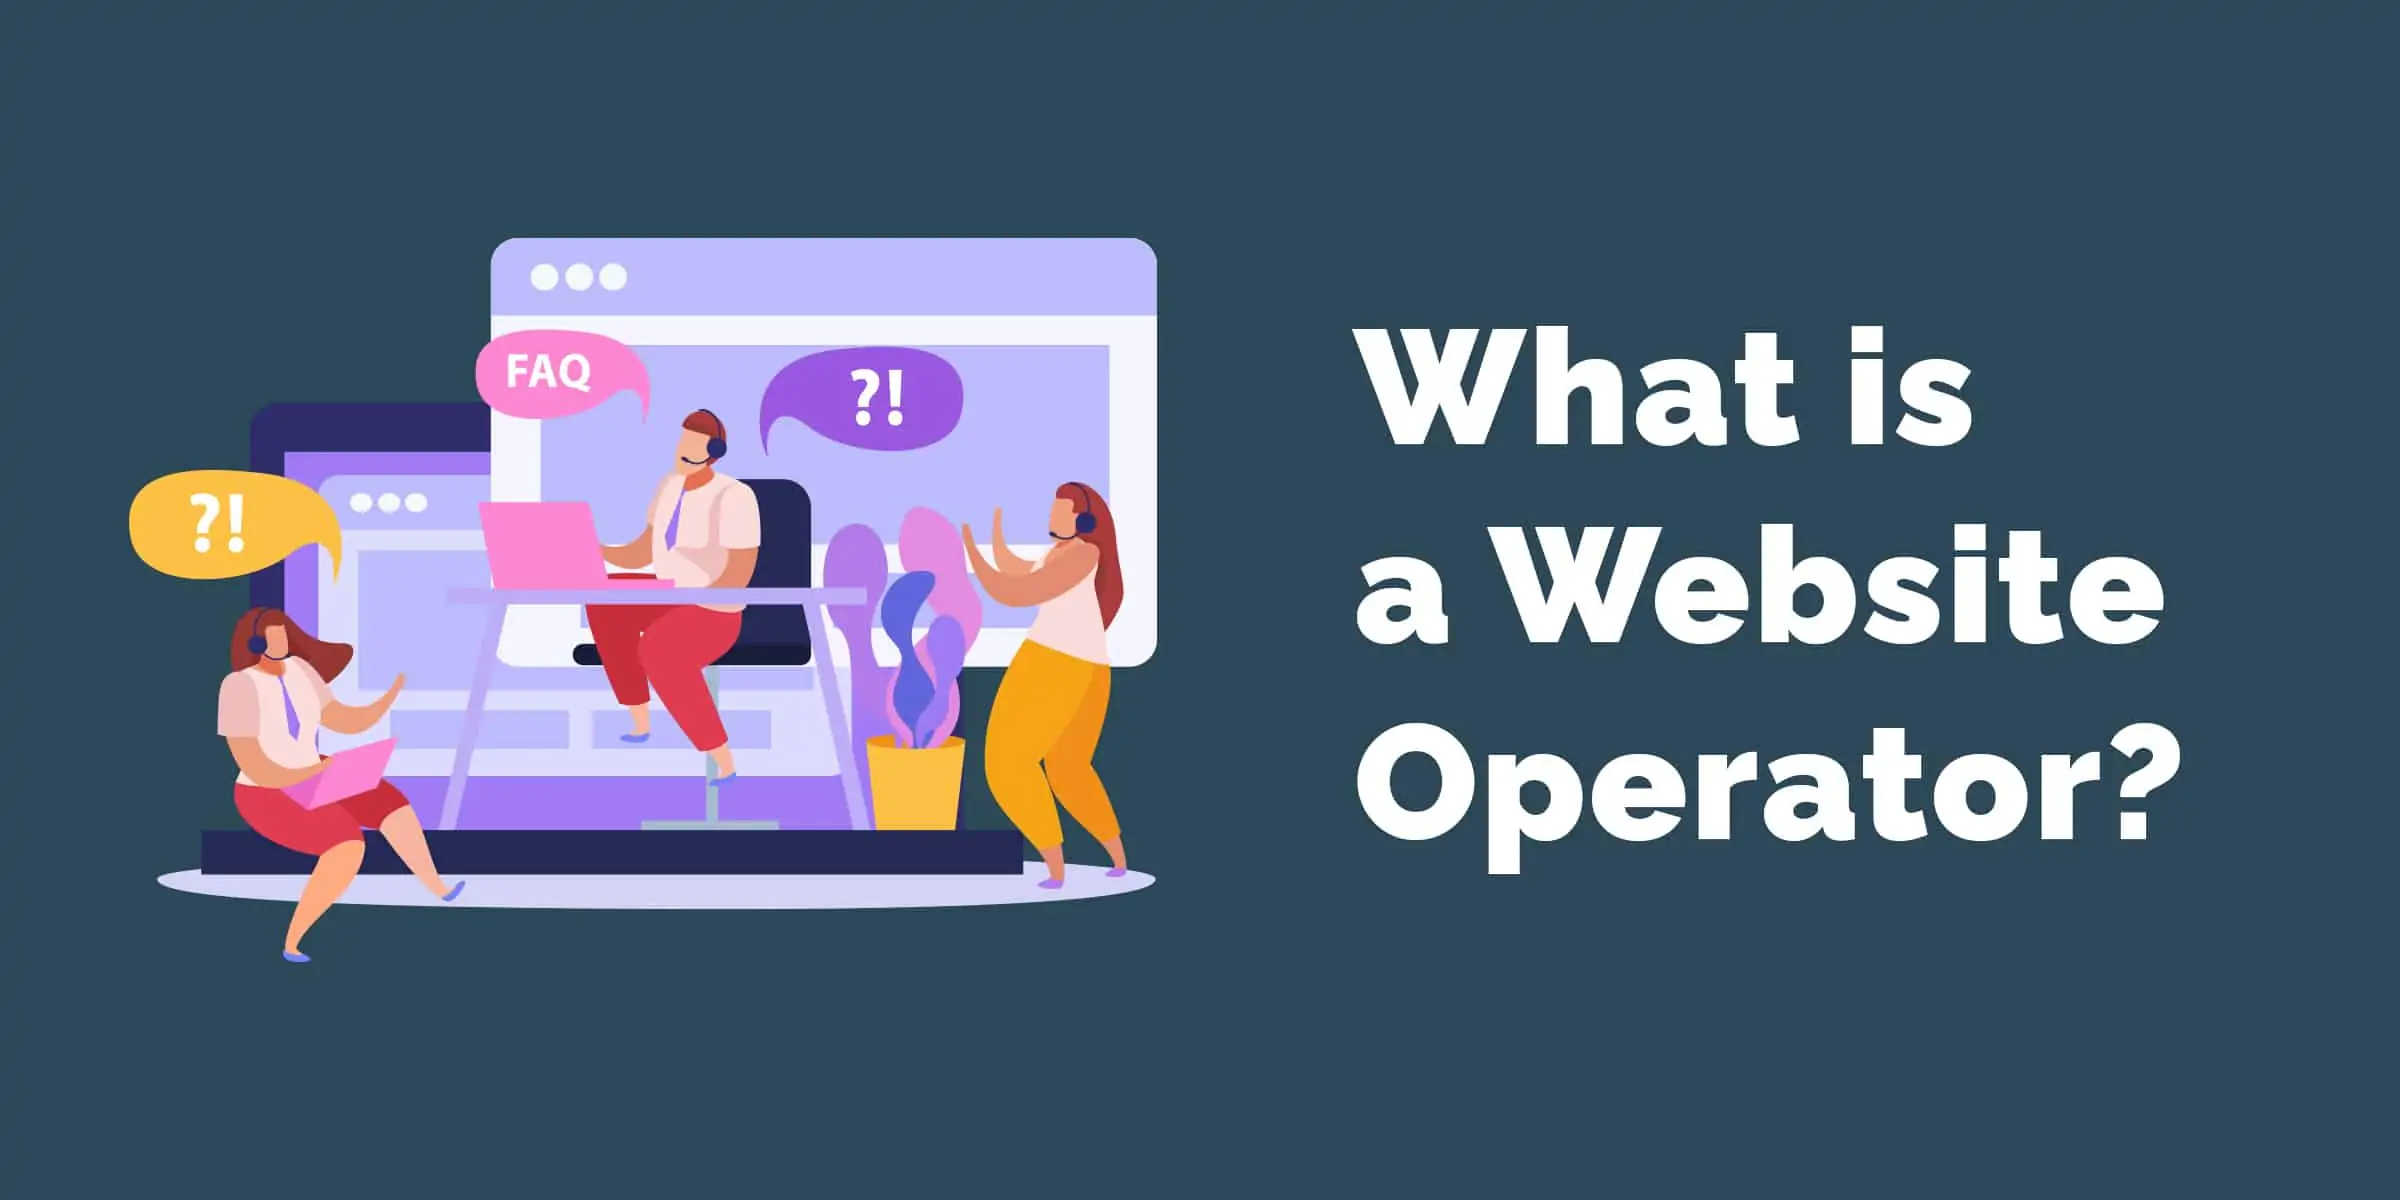 What is a Website Operator